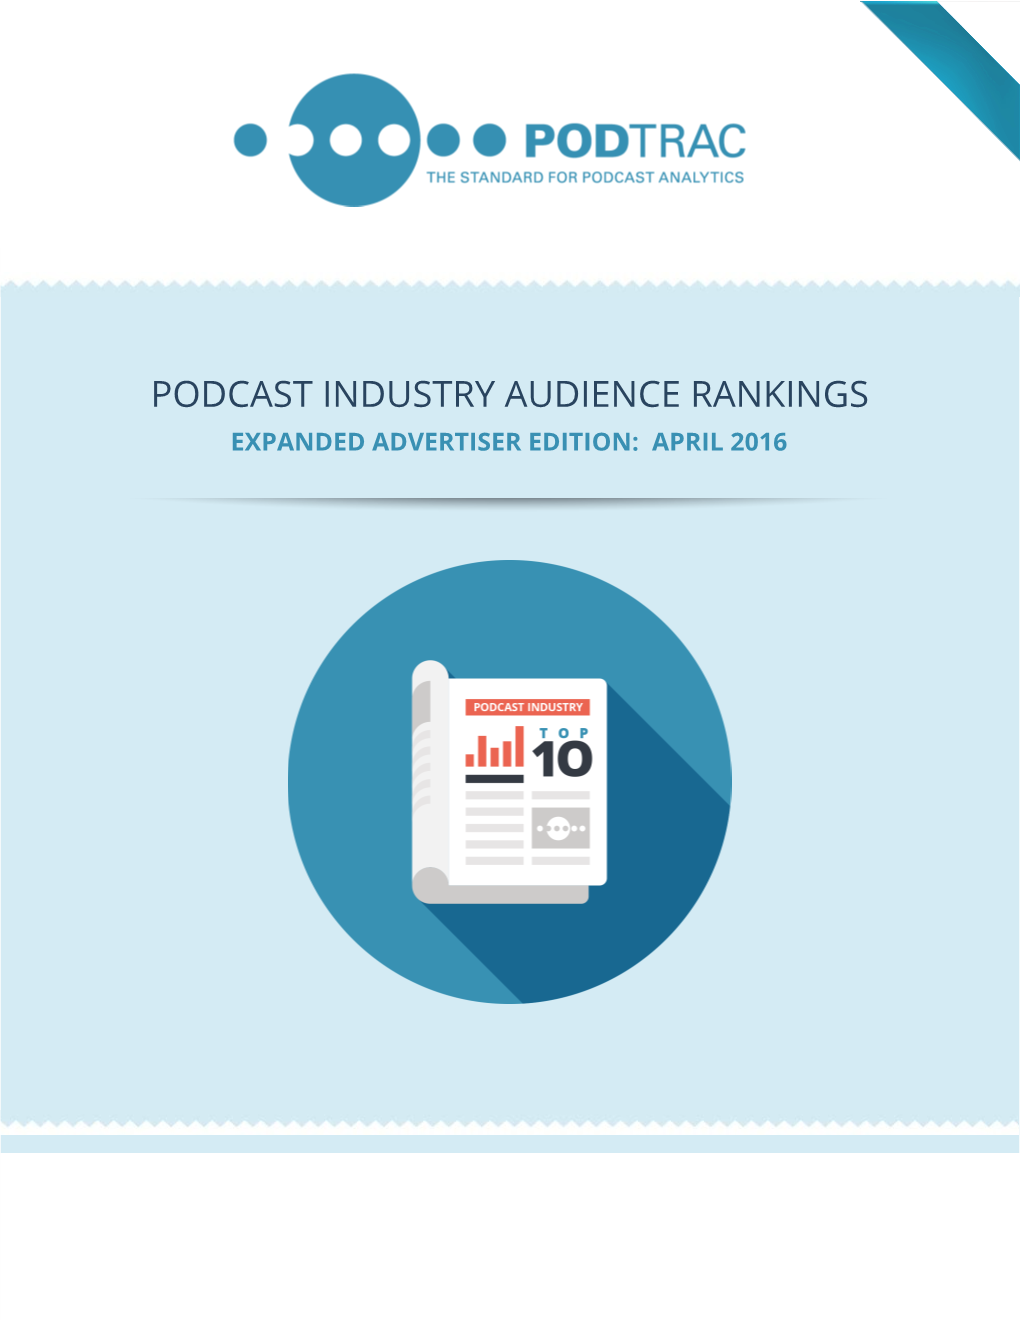 Podcast Industry Audience Rankings Expanded Advertiser Edition: April 2016